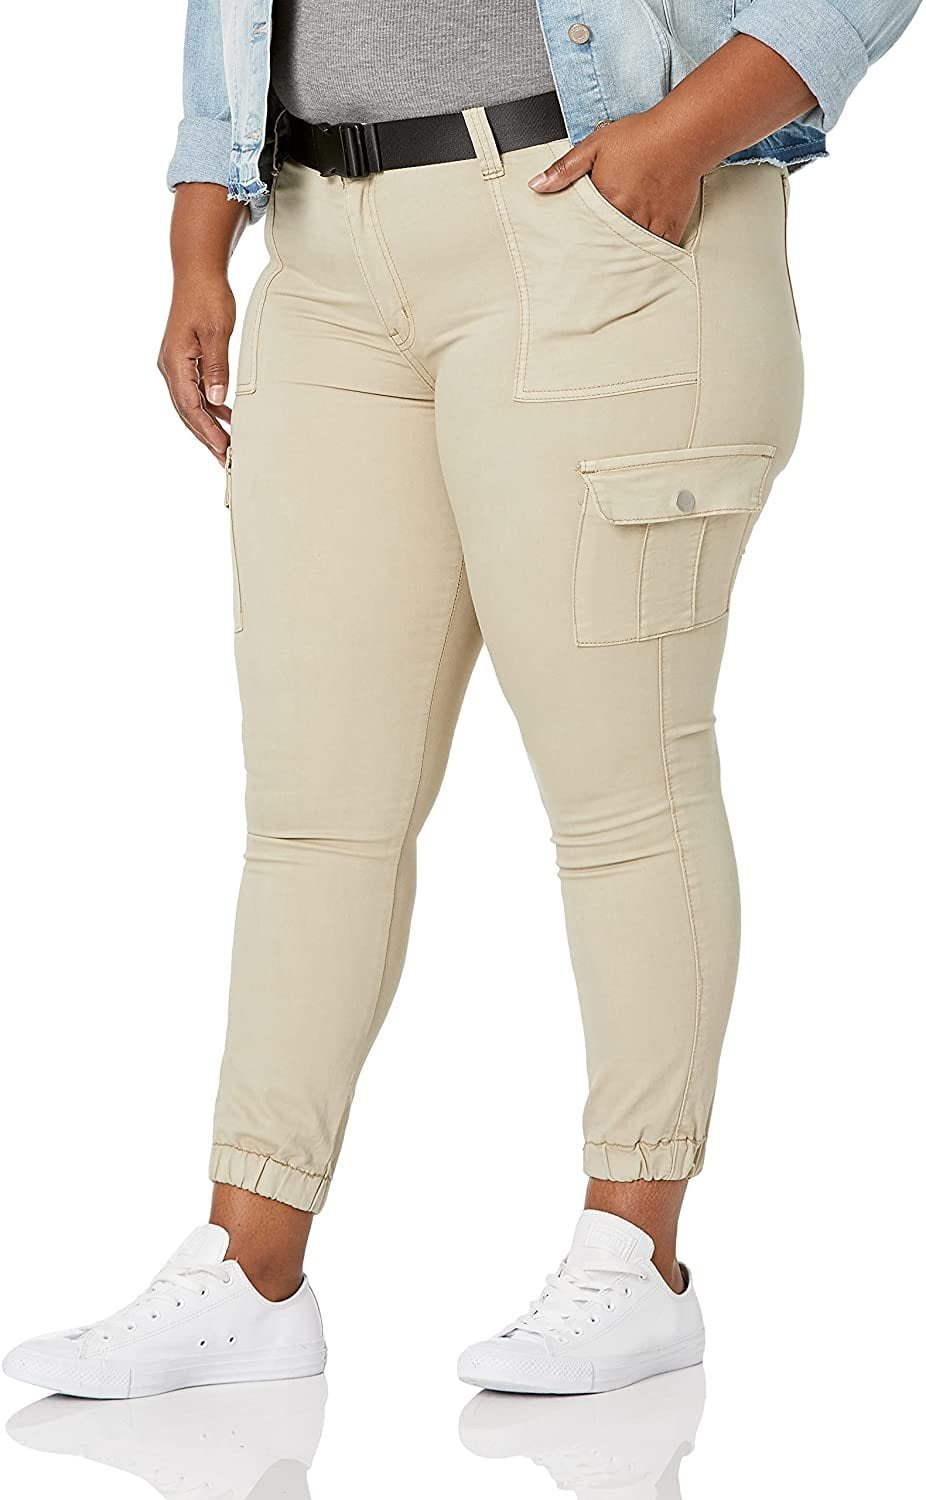 V.I.P. JEANS Cargo Pants for Women Juniors and Plus Sizes Camo